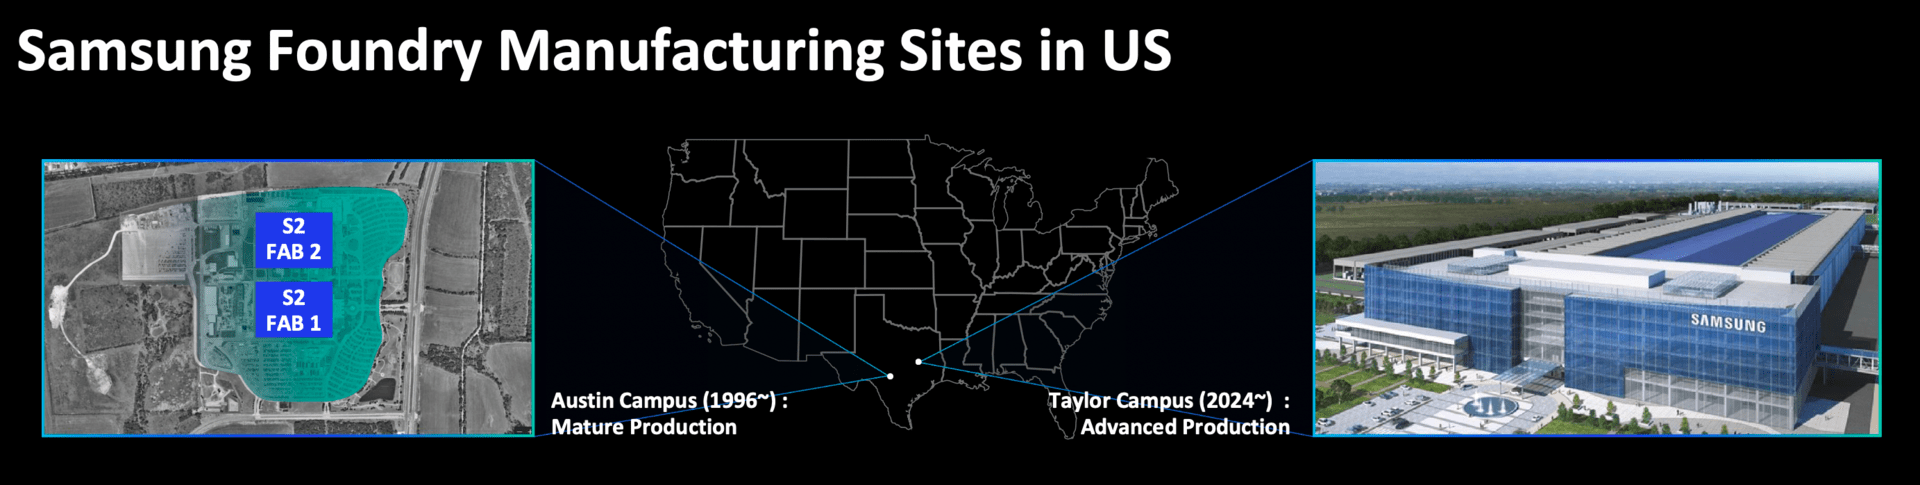 Samsung Foundry locations in the US